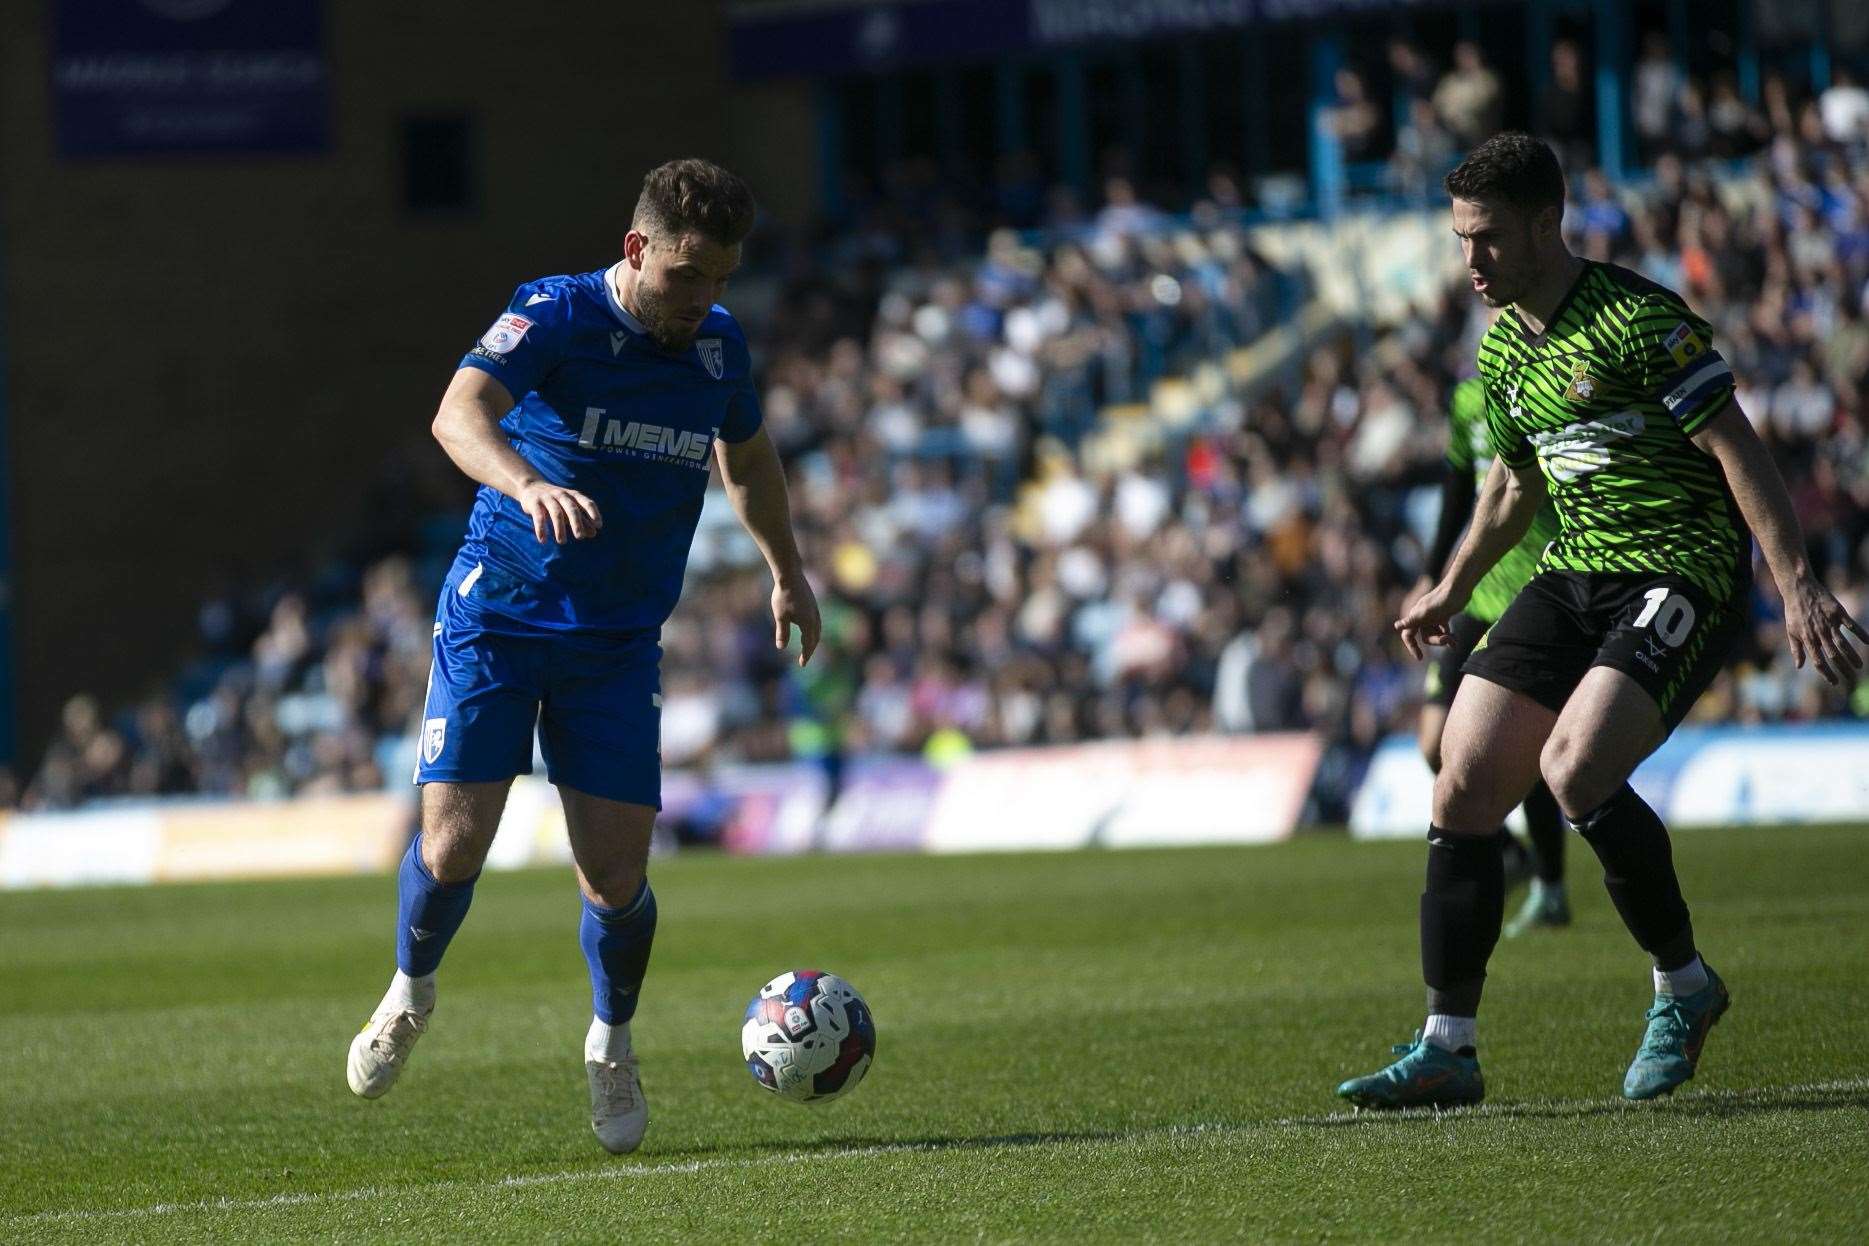 Alex MacDonald on the attack for Gillingham against Doncaster